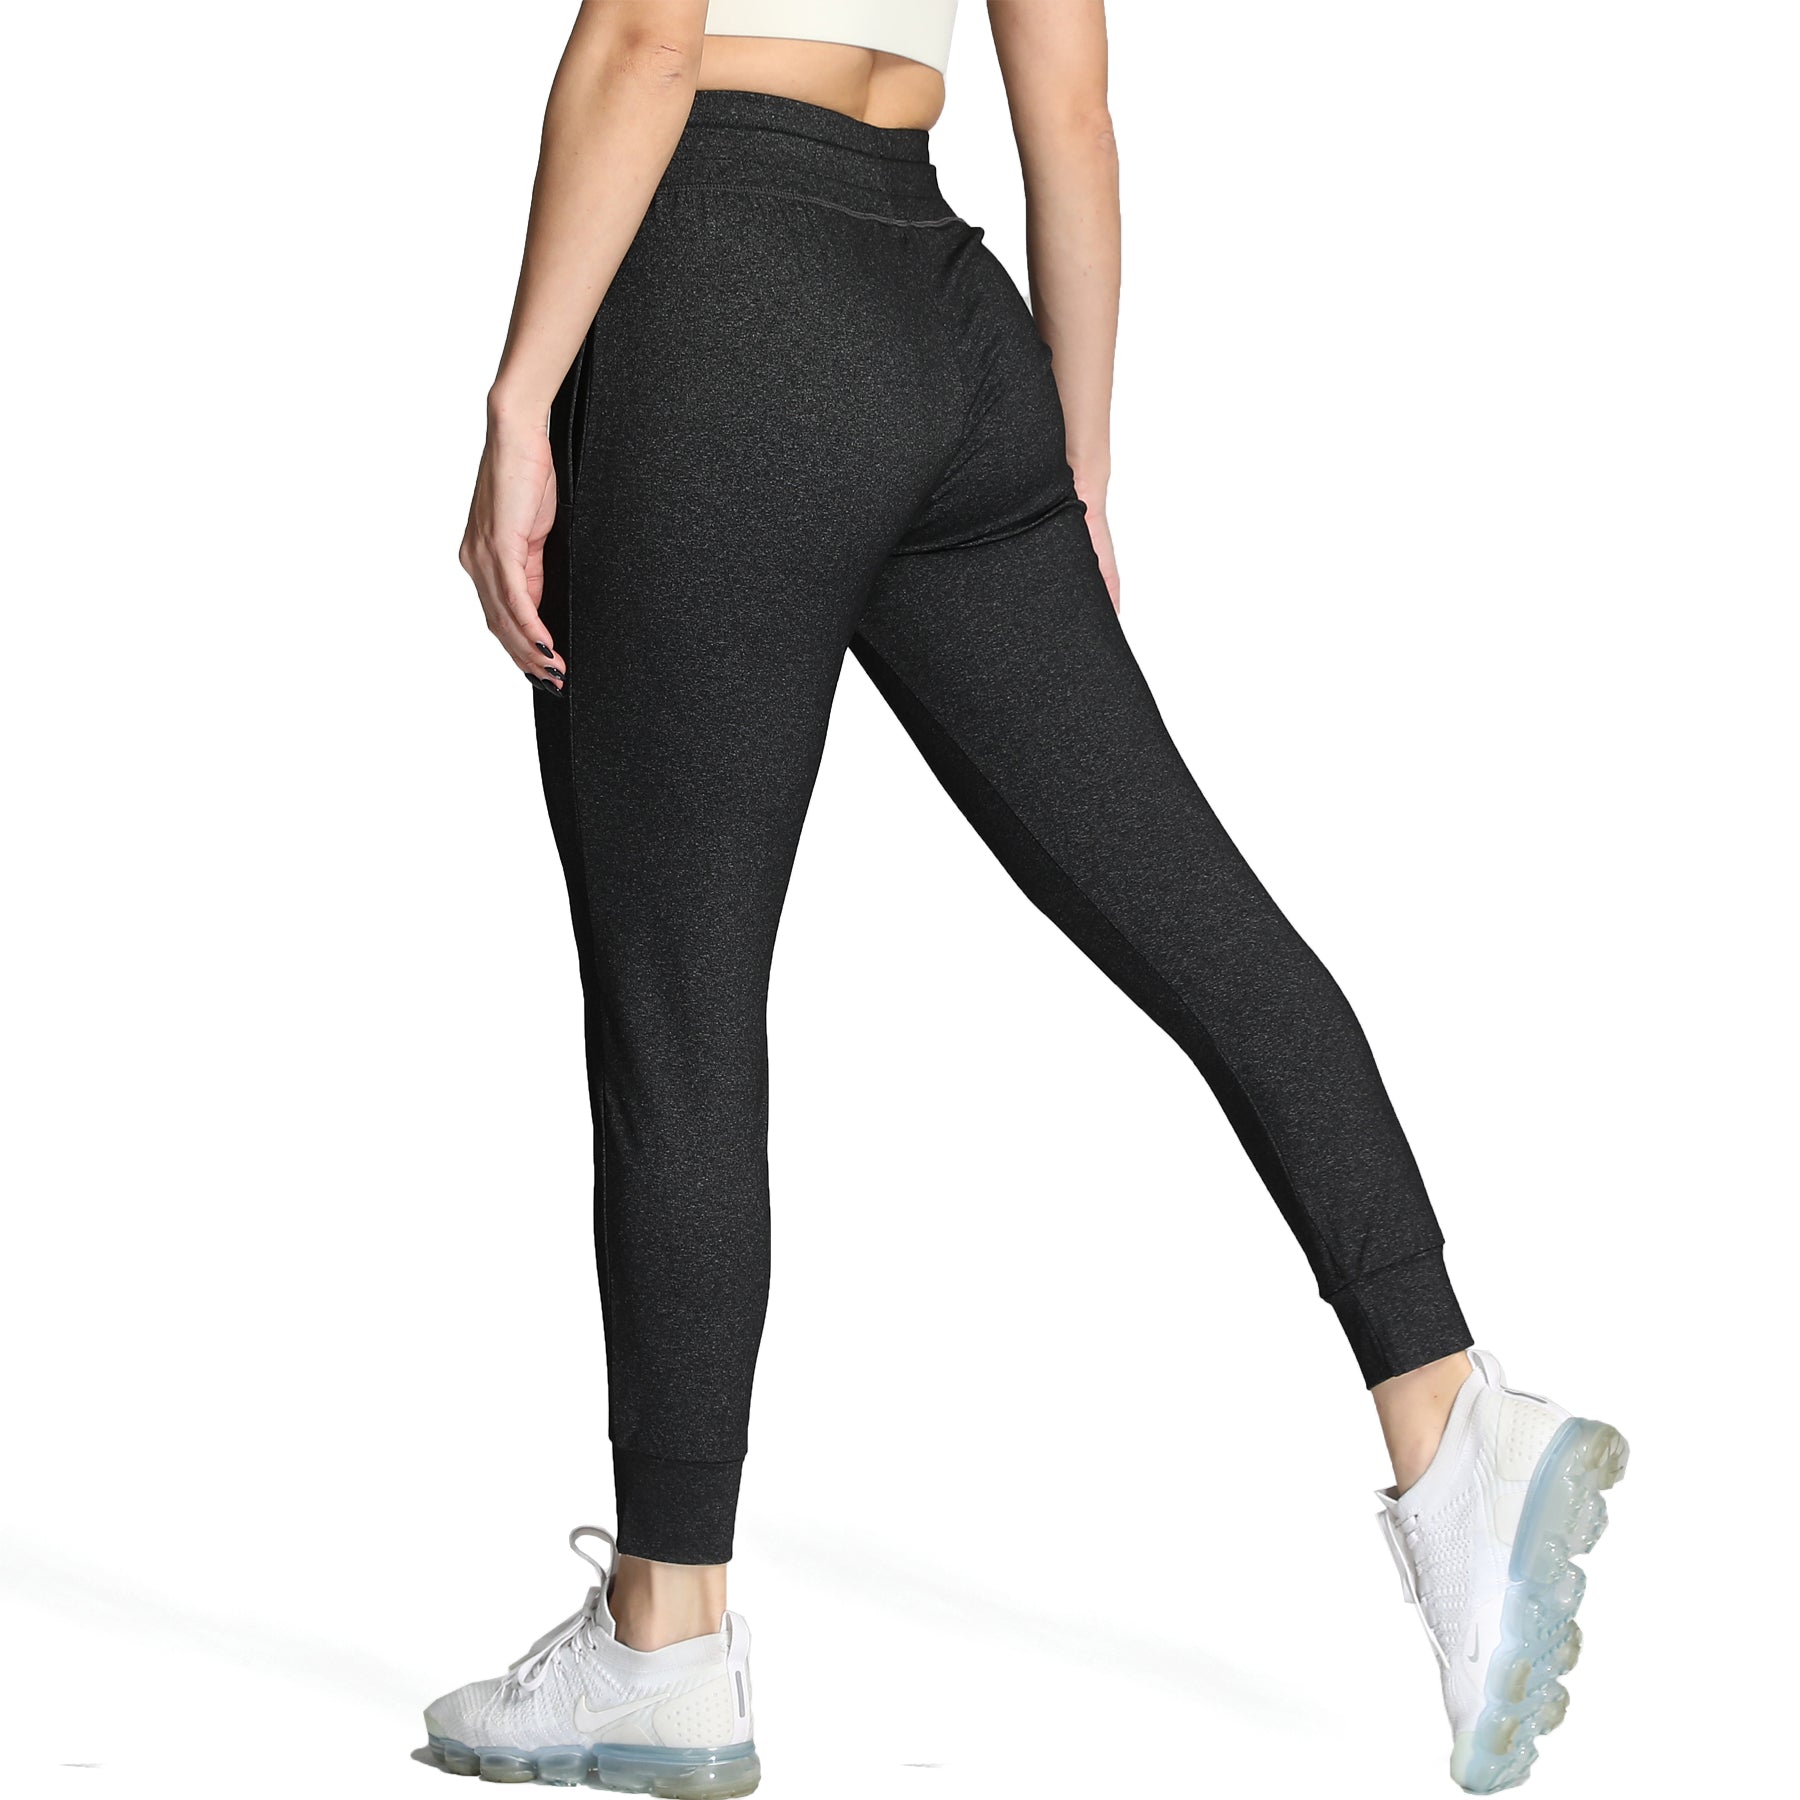 Aoxjox 25" Fitted Jogger Leggings